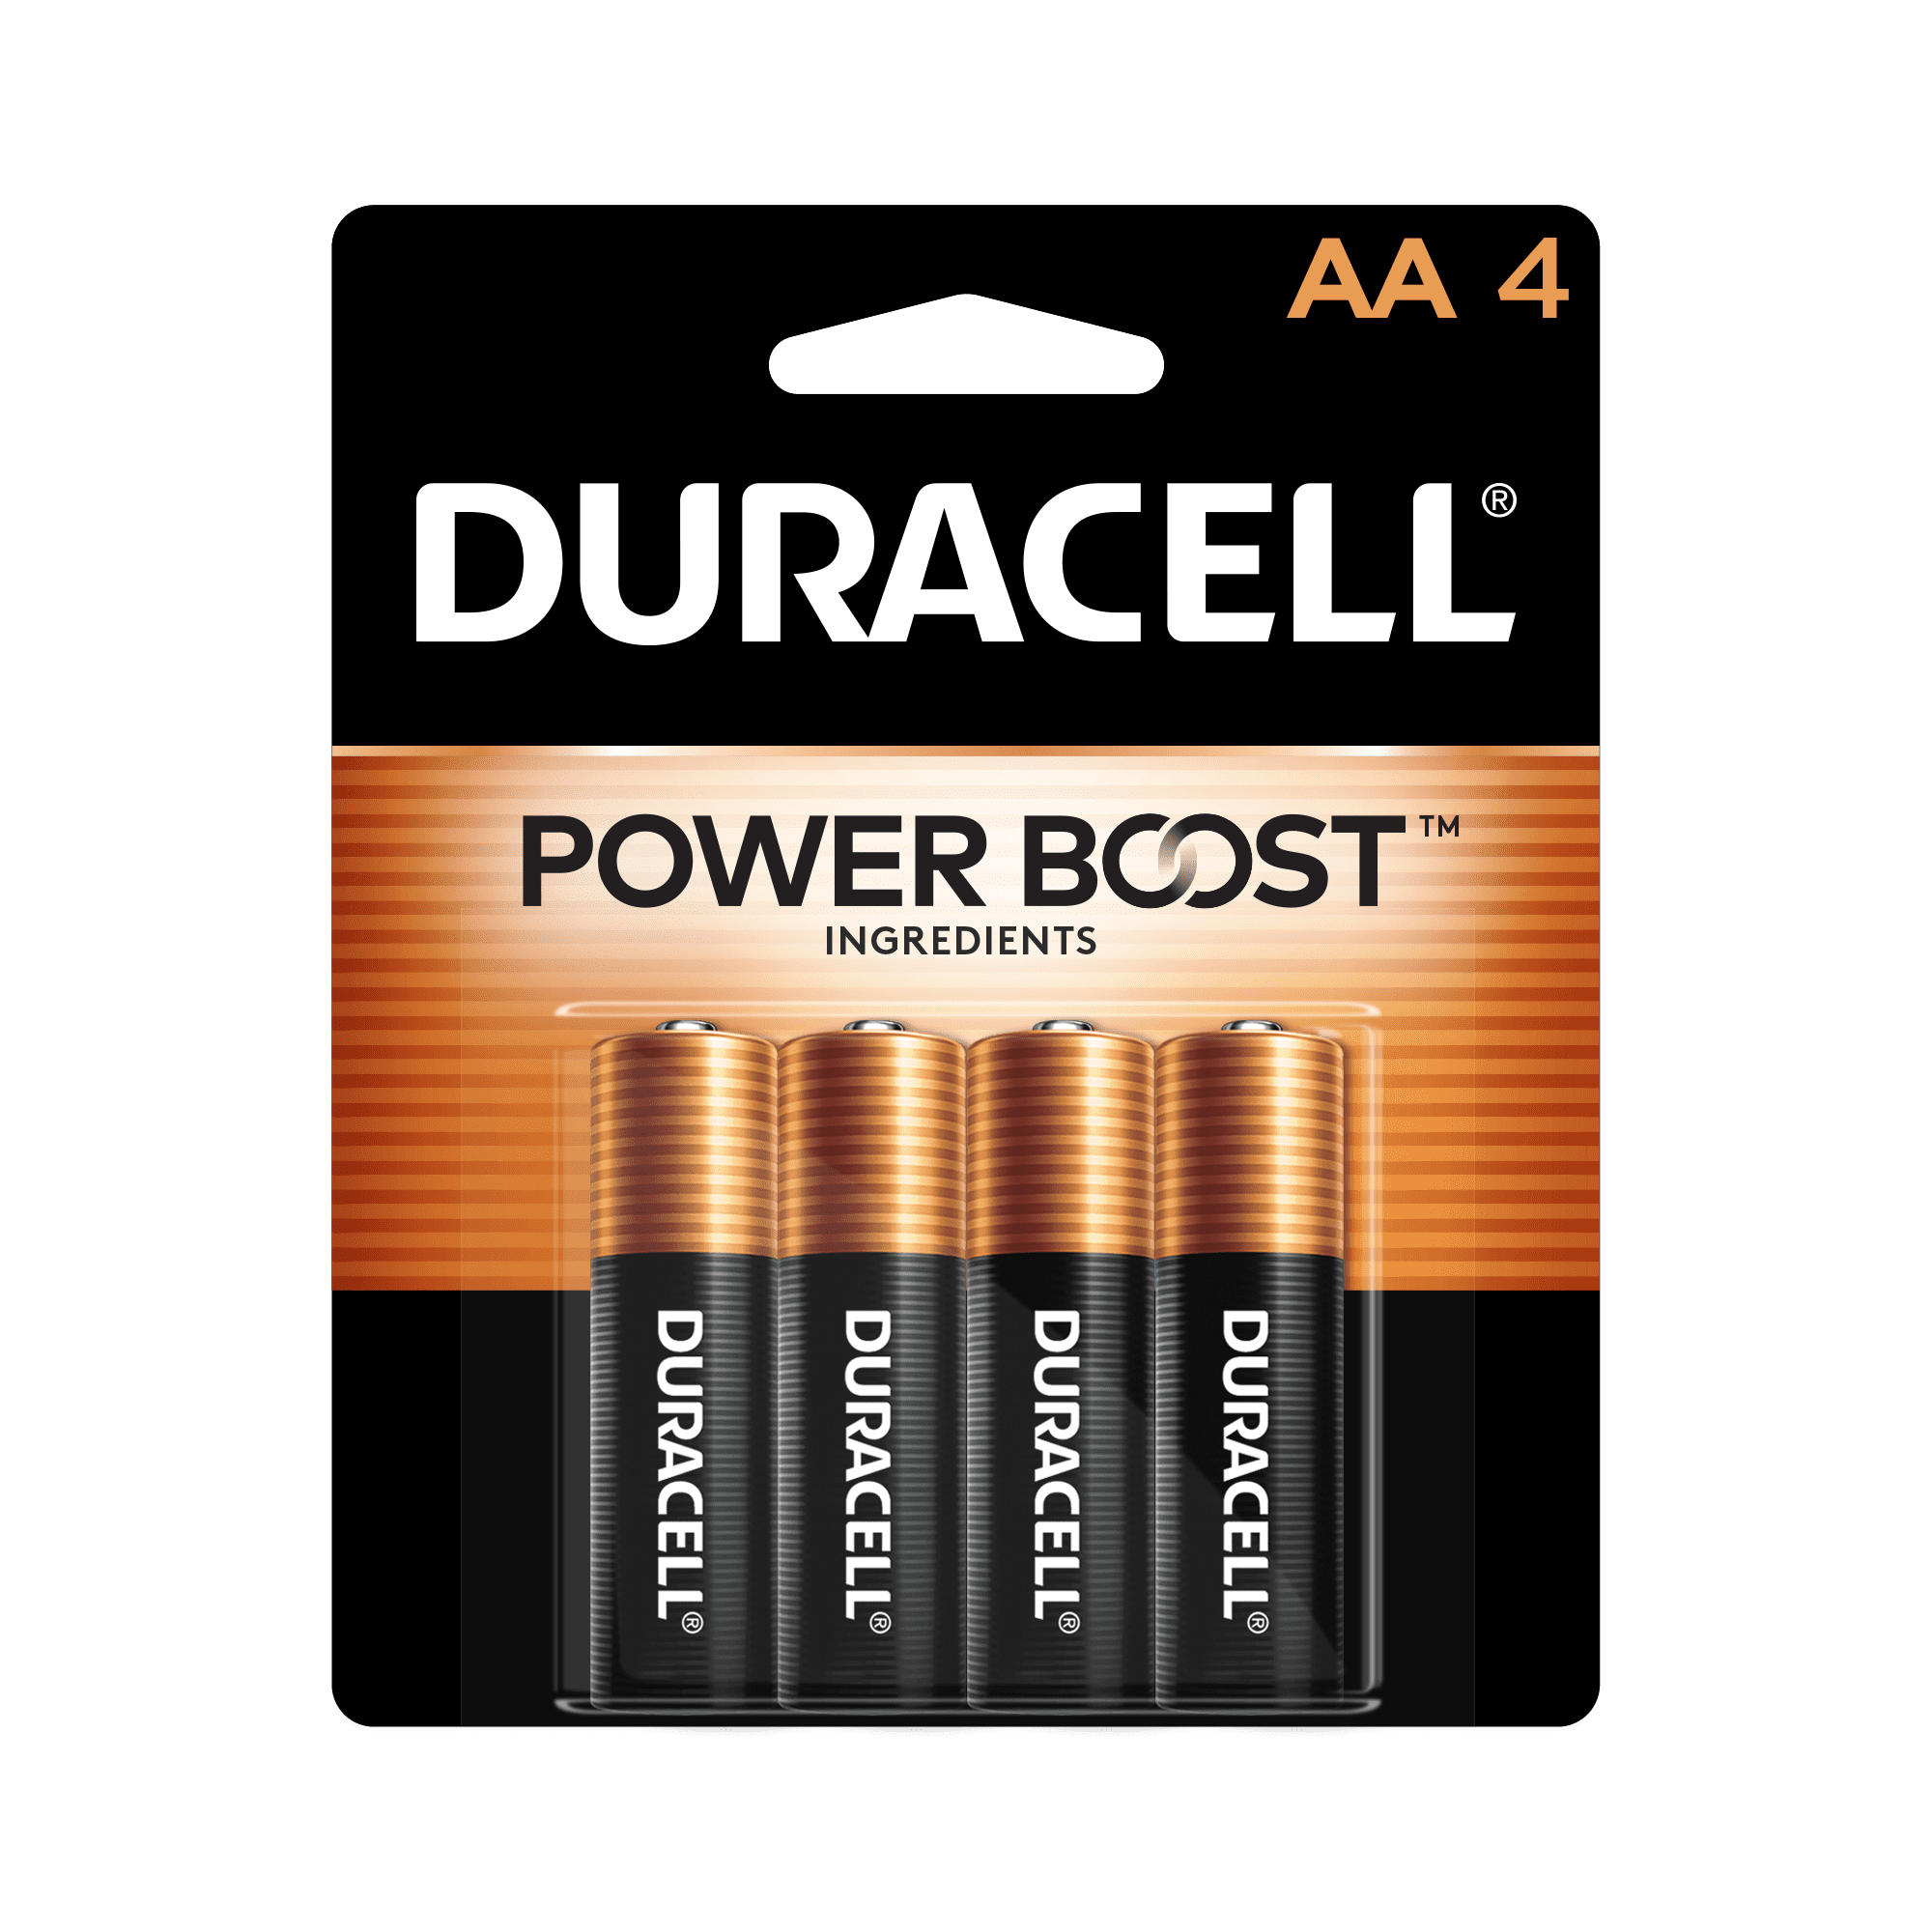 Duracell Coppertop AA Battery POWER BOOST™, 4 Pack Long-Lasting Walmart.com